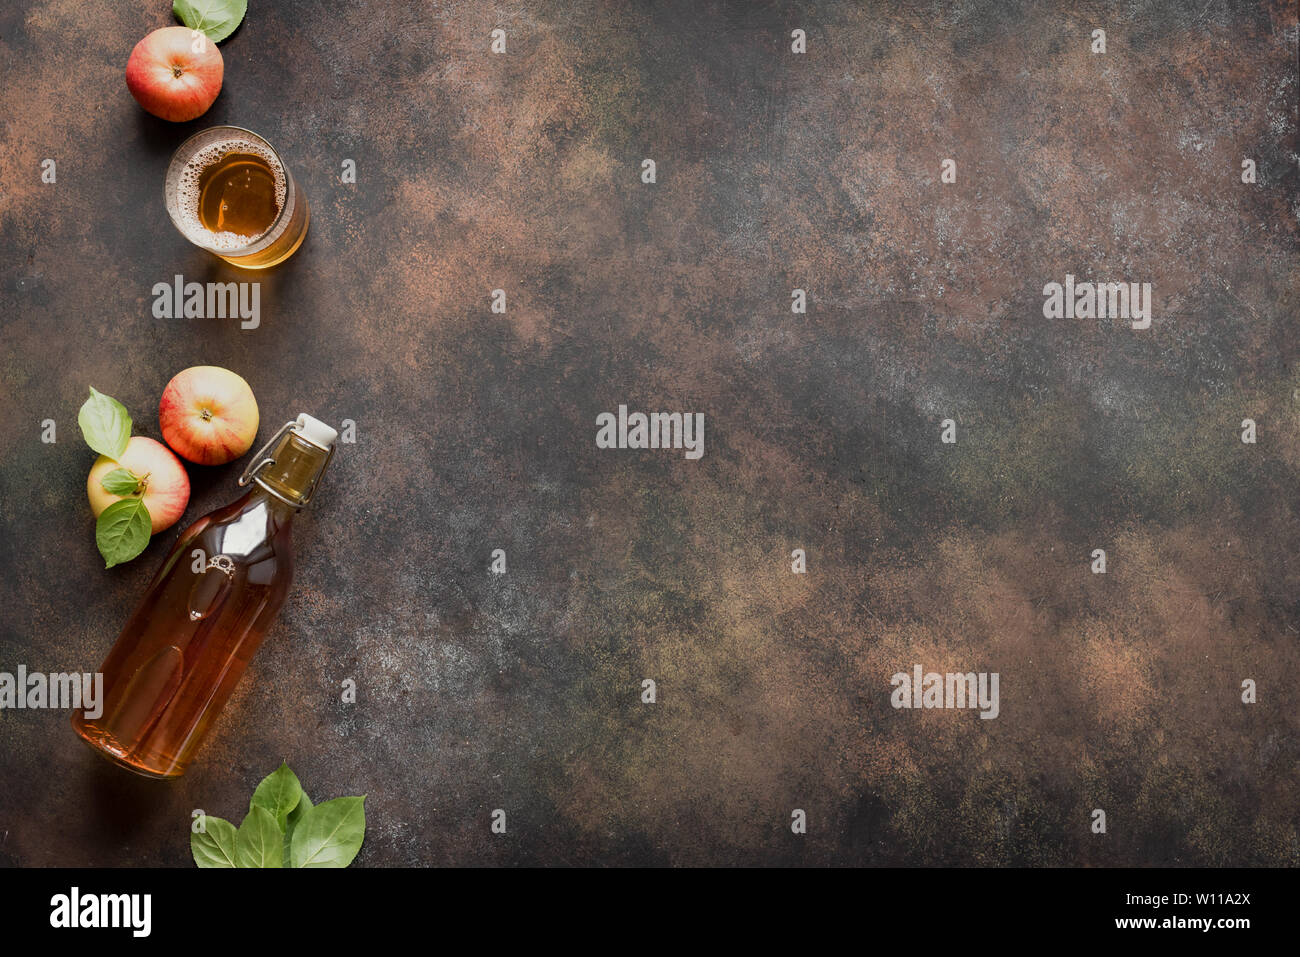 Apple cider drink or fermented fruit drink and organic apples on dark, top view, copy space. Healthy eating and lifestyle concept. Stock Photo